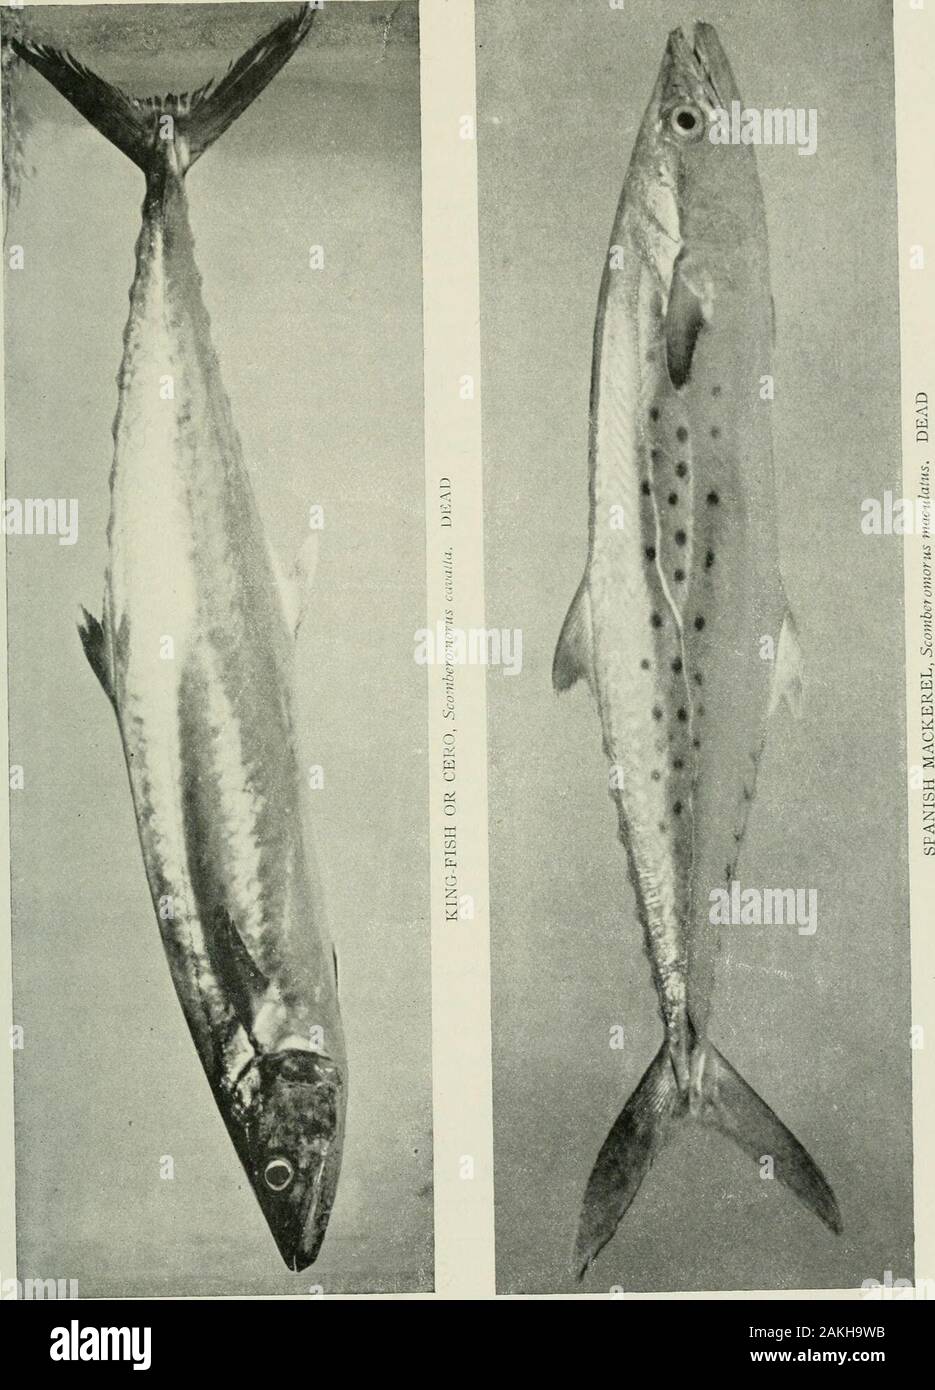 American food and game fishes : a popular account of all the species found in America, north of the equator, with keys for ready identification, life histories and methods of capture . Sierra ; Pintado ; Kingfish Scomberoinorus regalis (Bloch) This fine fish is found from Cape Cod to Brazil, but it isnot common anywhere except about Florida and Cuba. It grows 286. Kingfish ; Cero ; Cavalla to 5 or 6 feet in length, 20 pounds or more in weight, and isan excellent game and food-fish. It is found on the southFlorida Coast and is caught by trolling. It is not always dis-tinguished by the fishermen Stock Photo